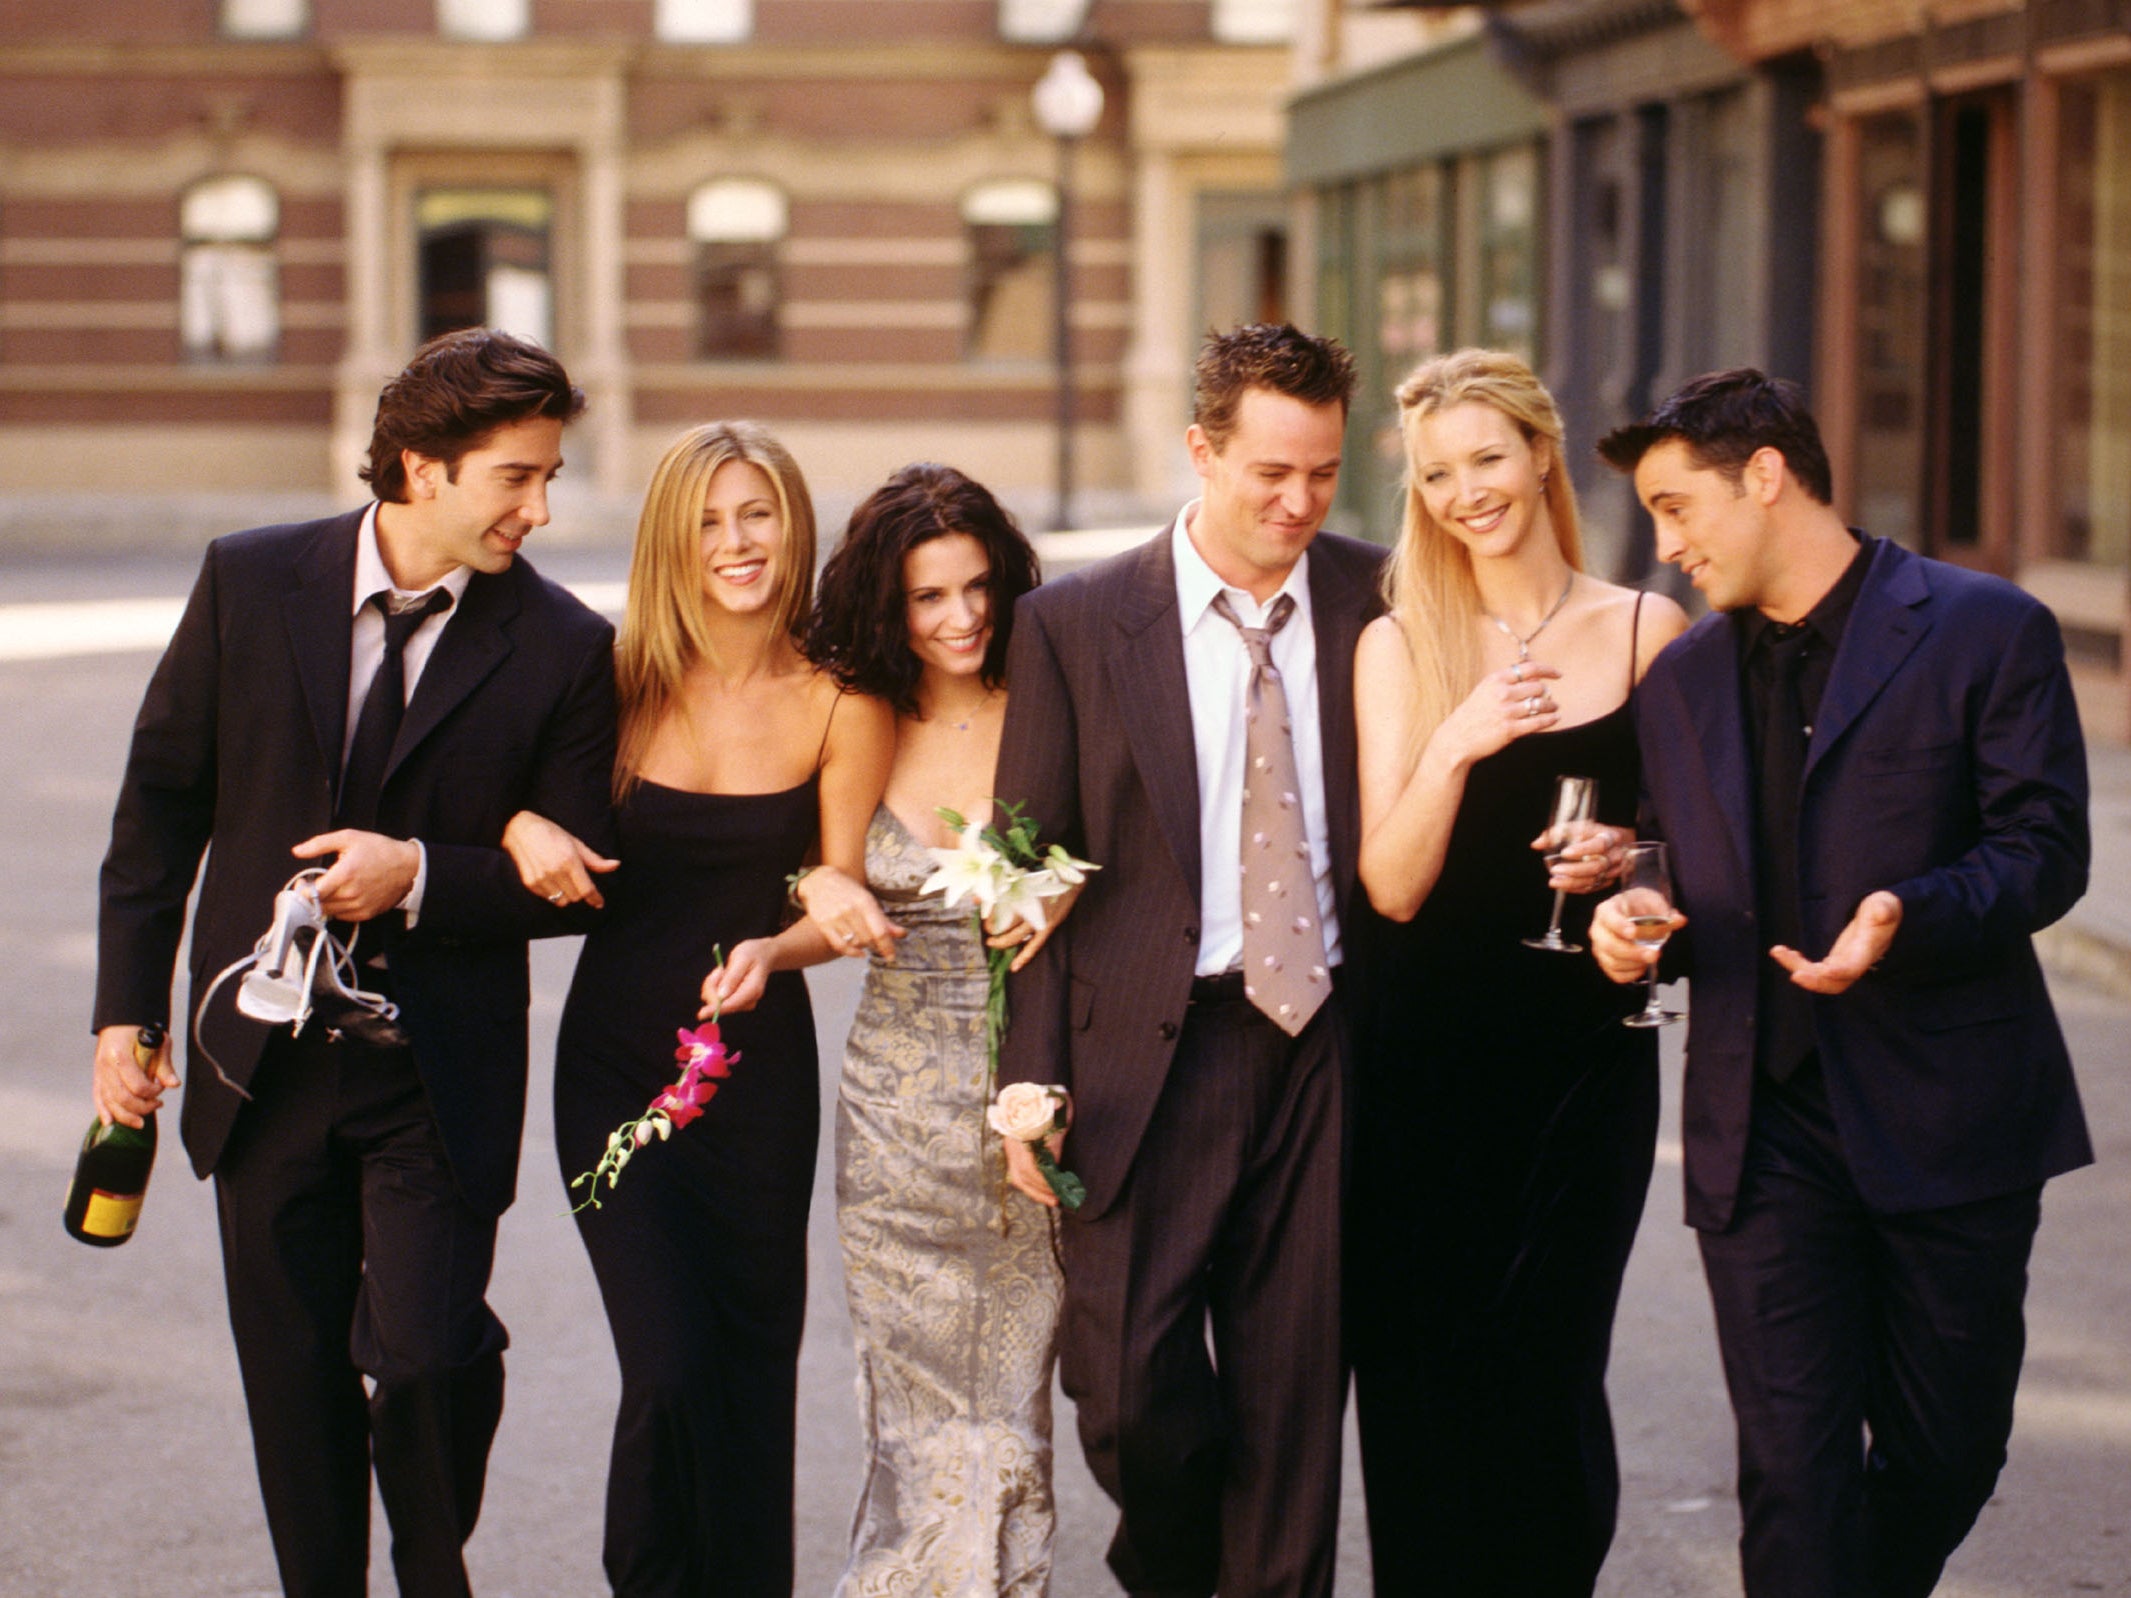 Throwback: Friends was one of the most popular series of all time